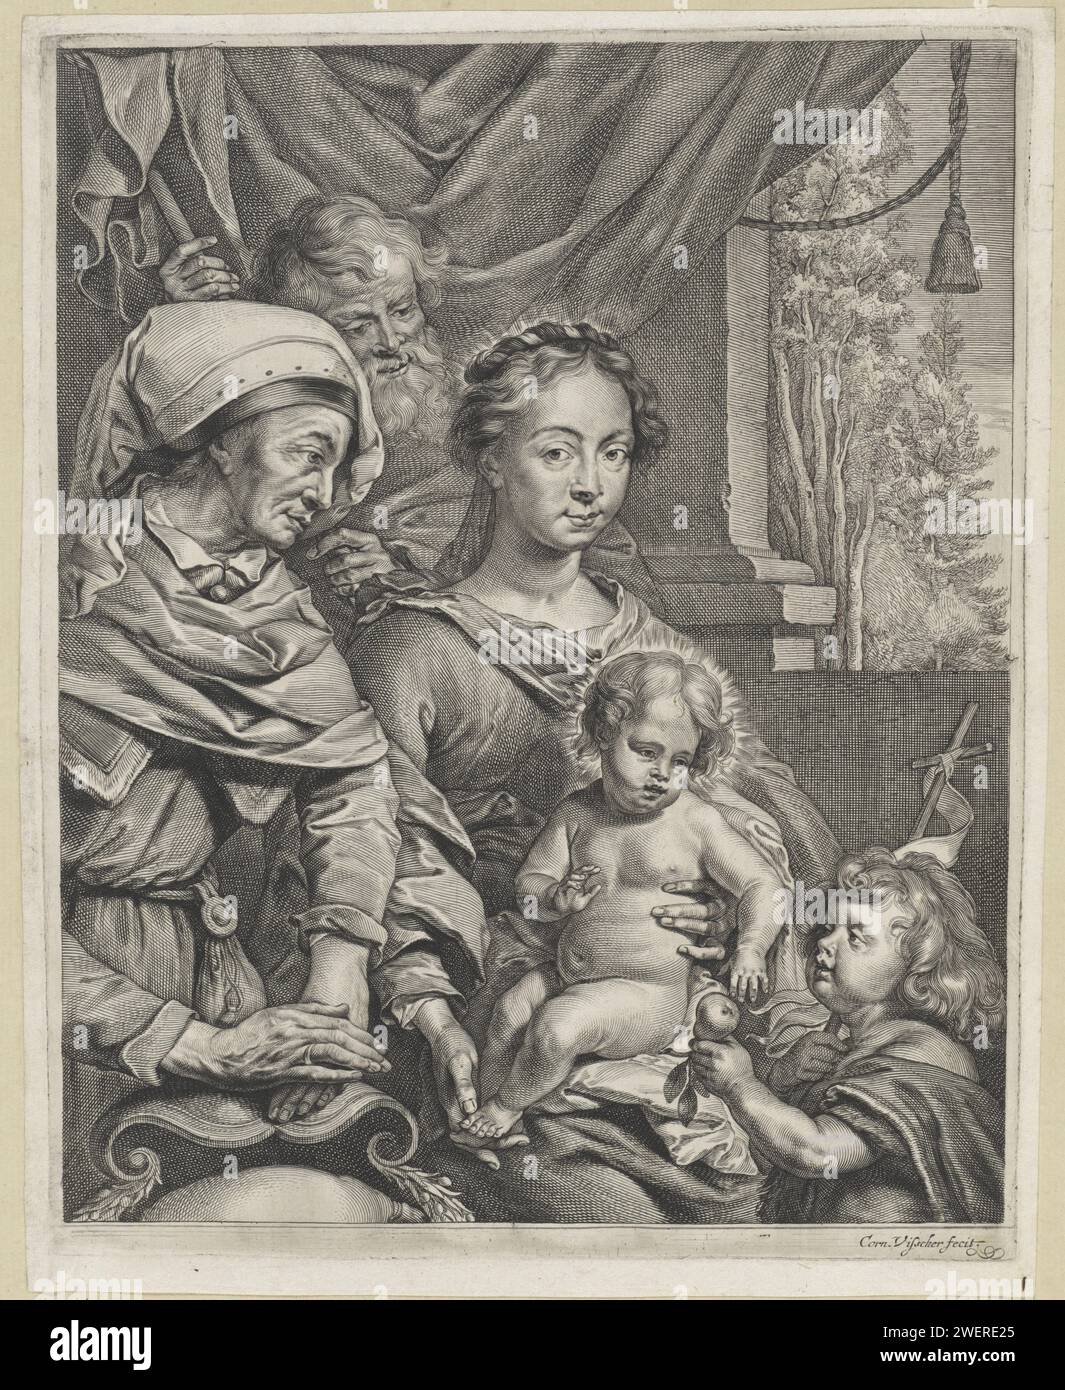 Holy family with Elisabet and Johannes, Cornelis Visscher (II), After Jacopo Palma (Il Vecchio), 1638 - 1658 print The Holy Family with Elisabet and John the Baptist as a child. John, with a banner in his hand, stands for the Christ child and offers him a pear.  paper engraving / etching Holy Family with John the Baptist (as child). fruits: pear Stock Photo